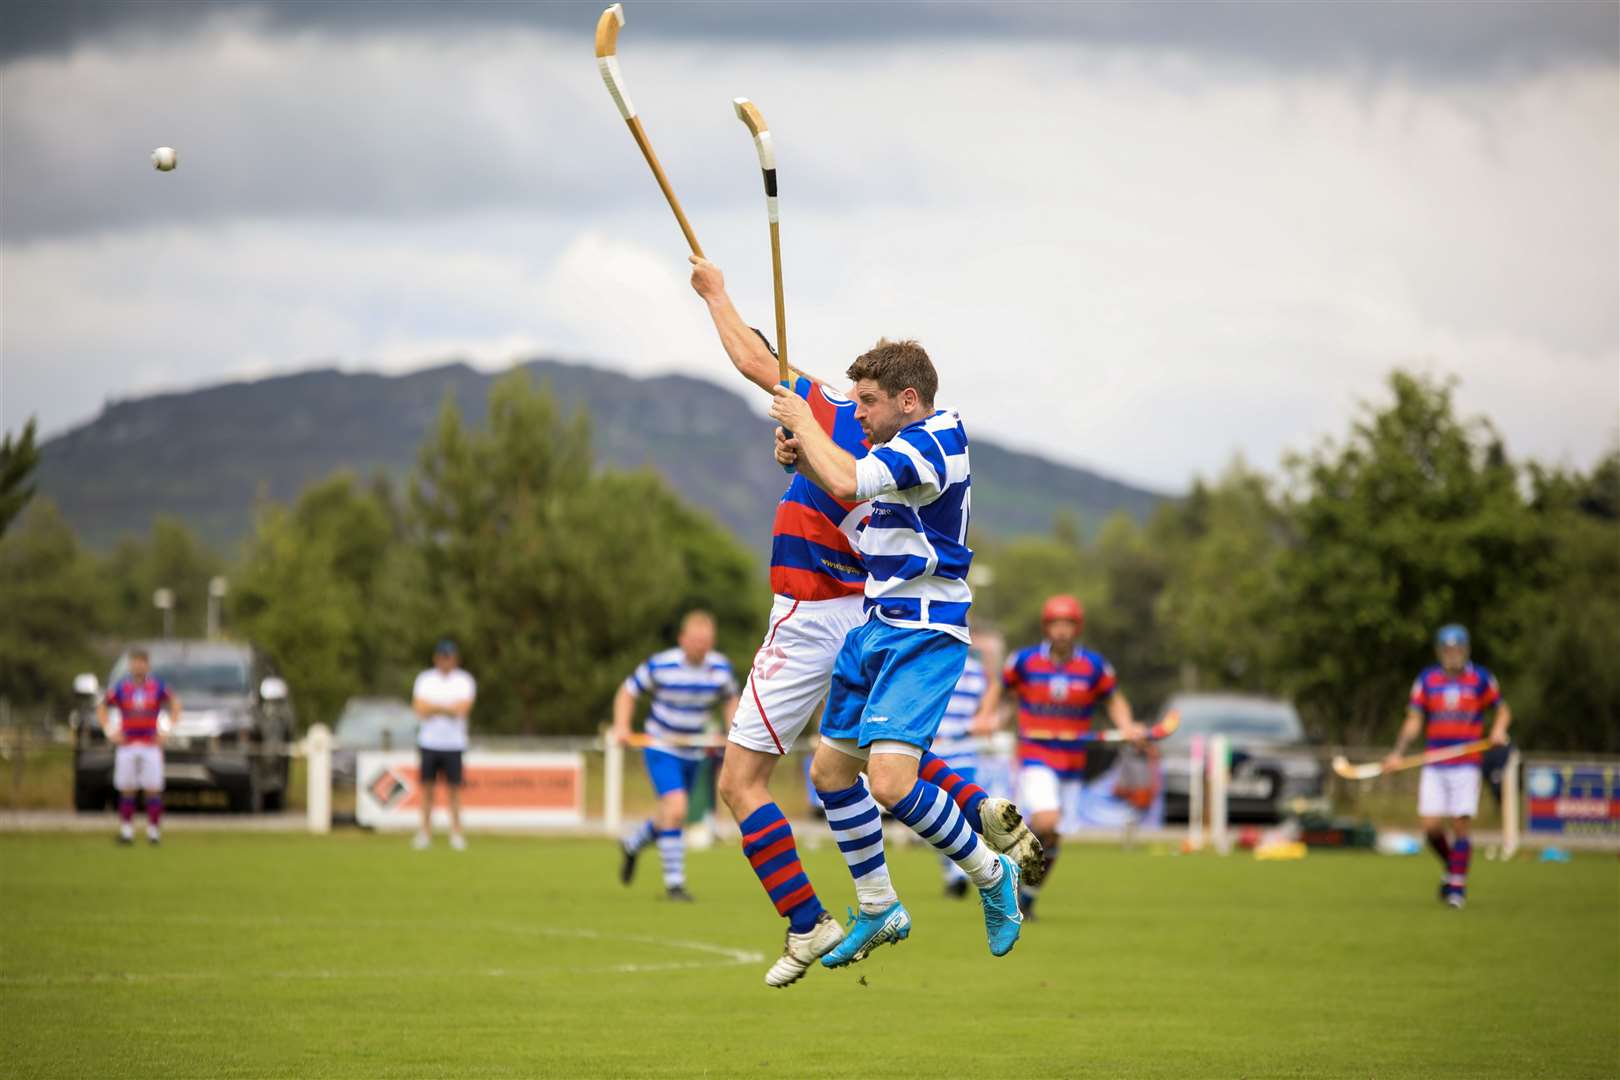 THROW UP NO.1: The derby season gets under way at the Eilan in Newtonmore. Newtonmore's Drew MacDonald (blue and white) was soon battling it out with Kingussie's Fraser Munro